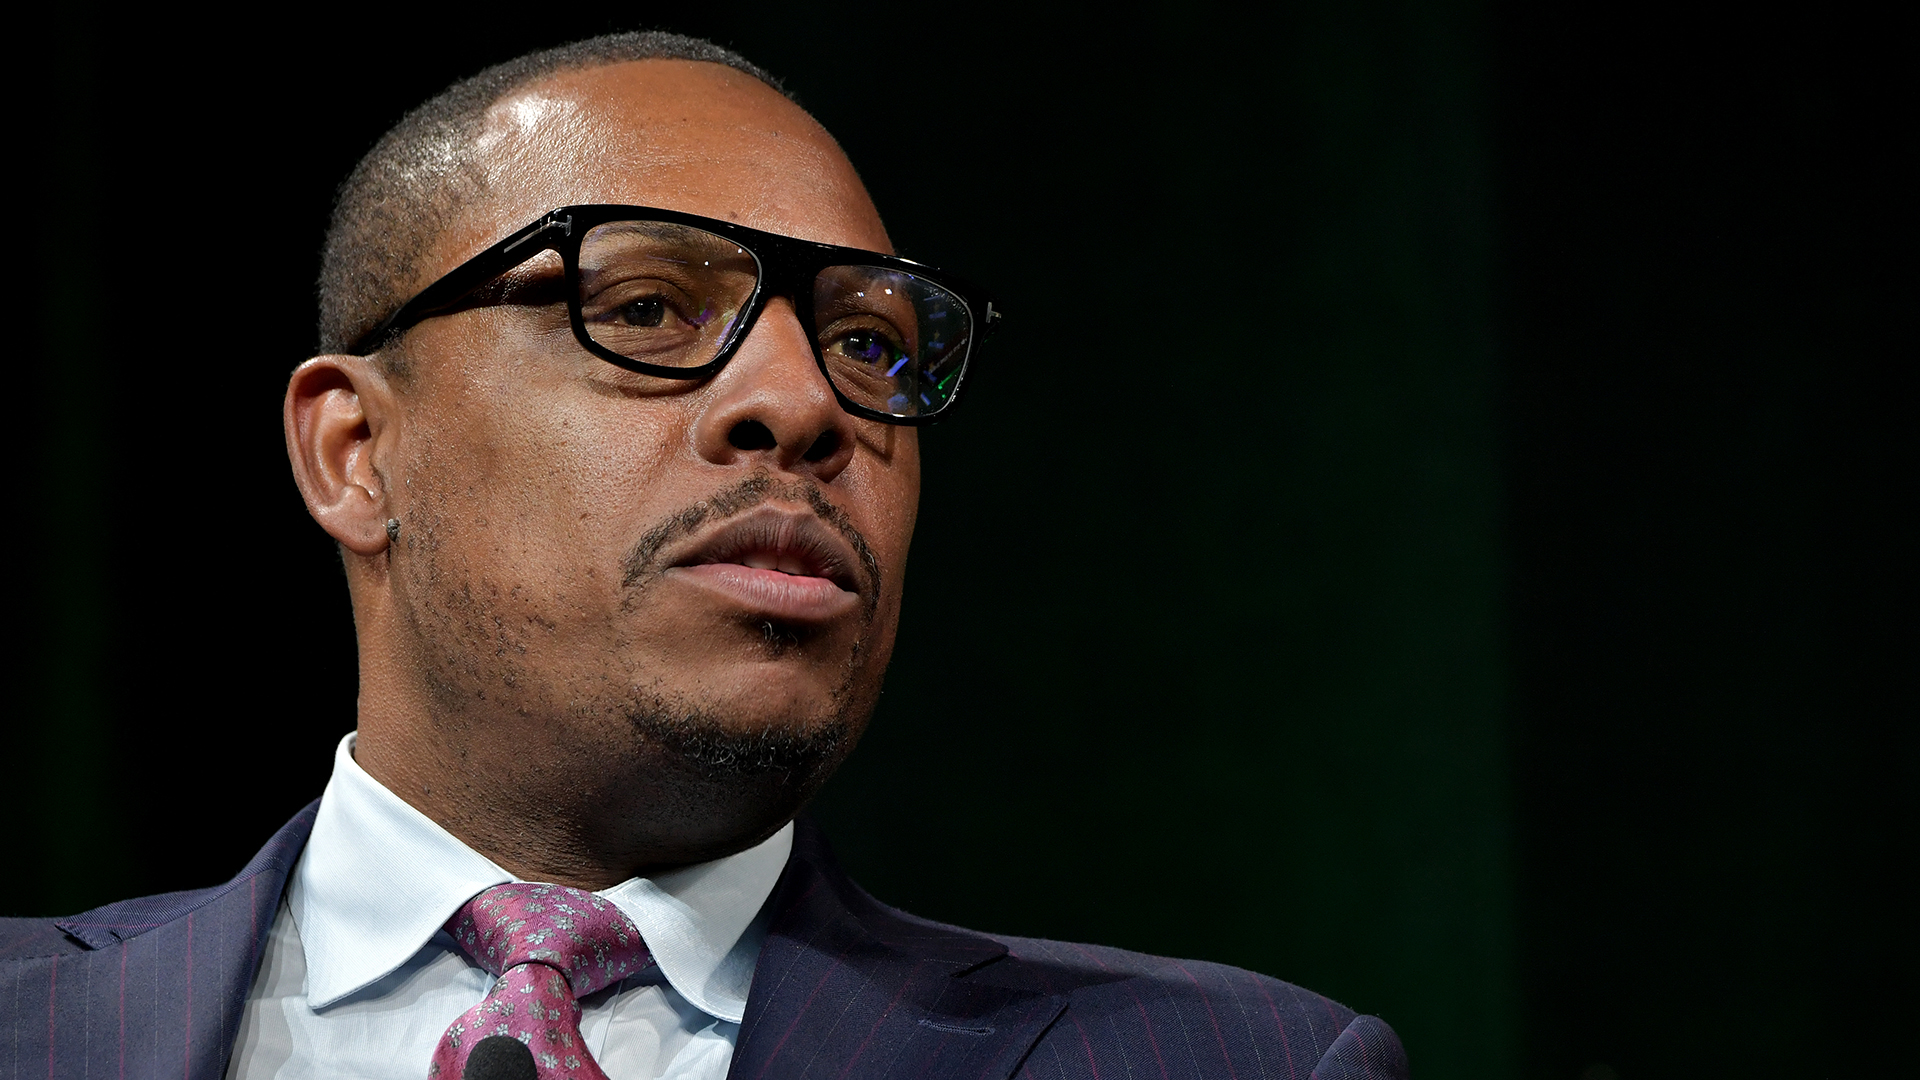 Former NBA Player Paul Pierce Settles With SEC for $1.4M Over Unlawful Promotion Of Crypto Securities